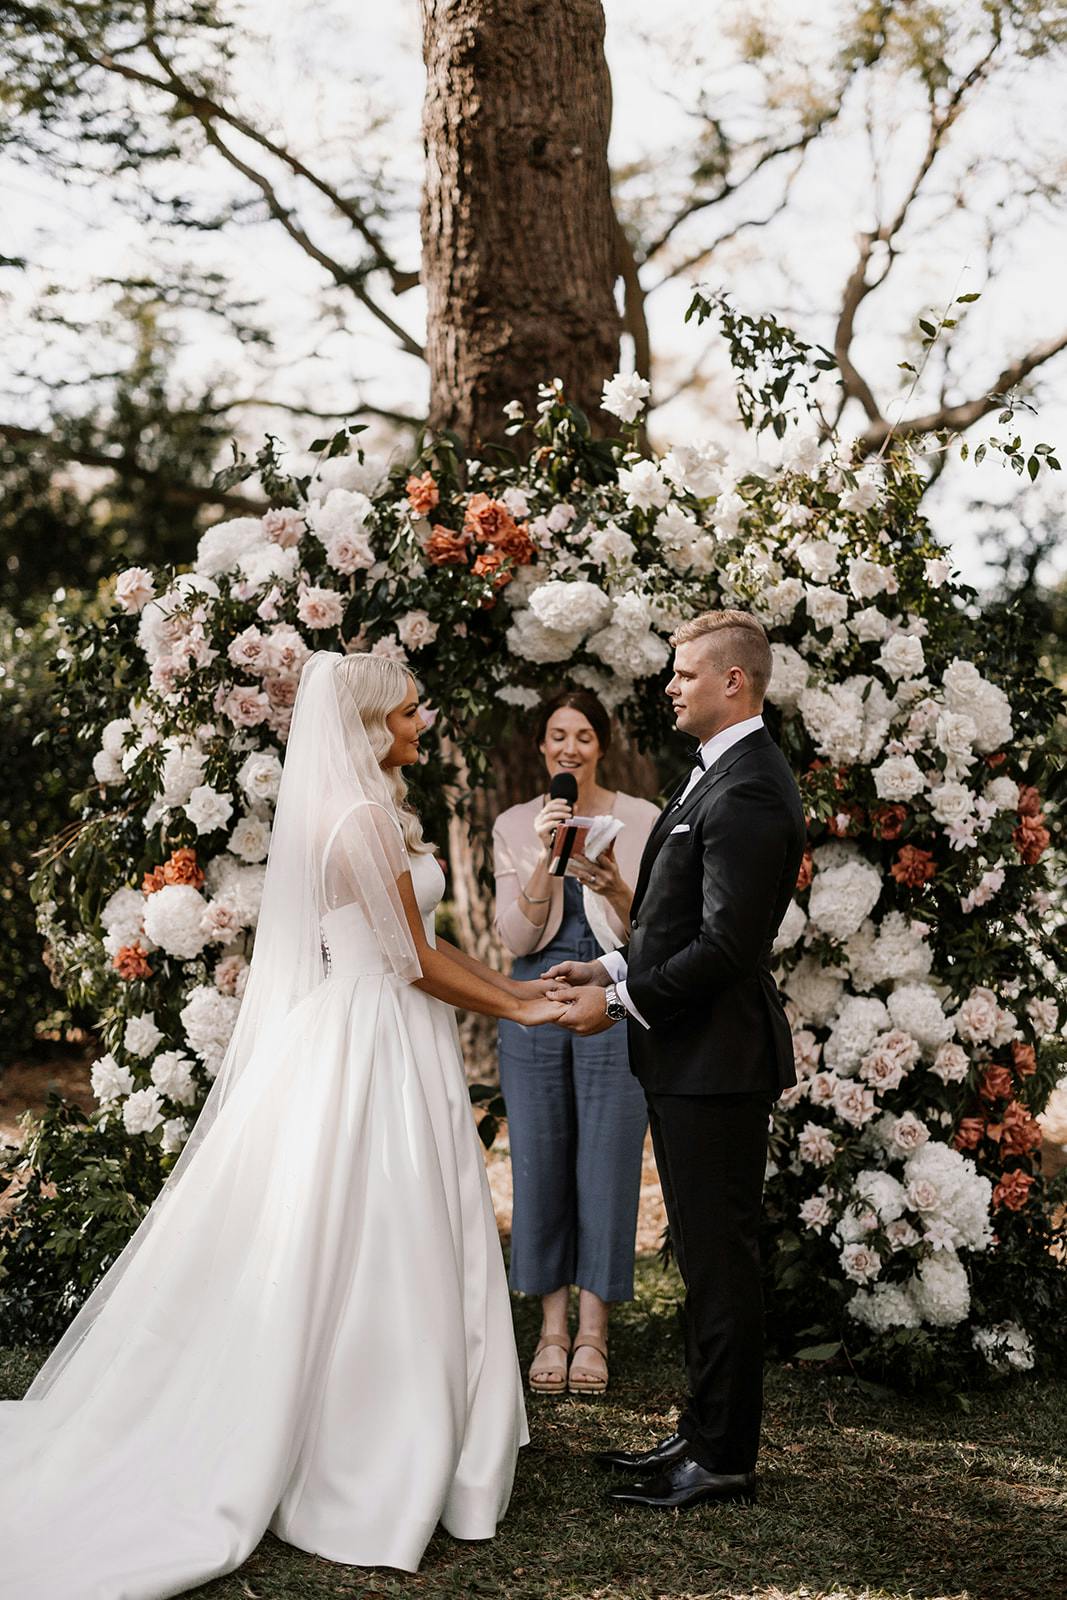 Bride and groom standing in front of floral arbour